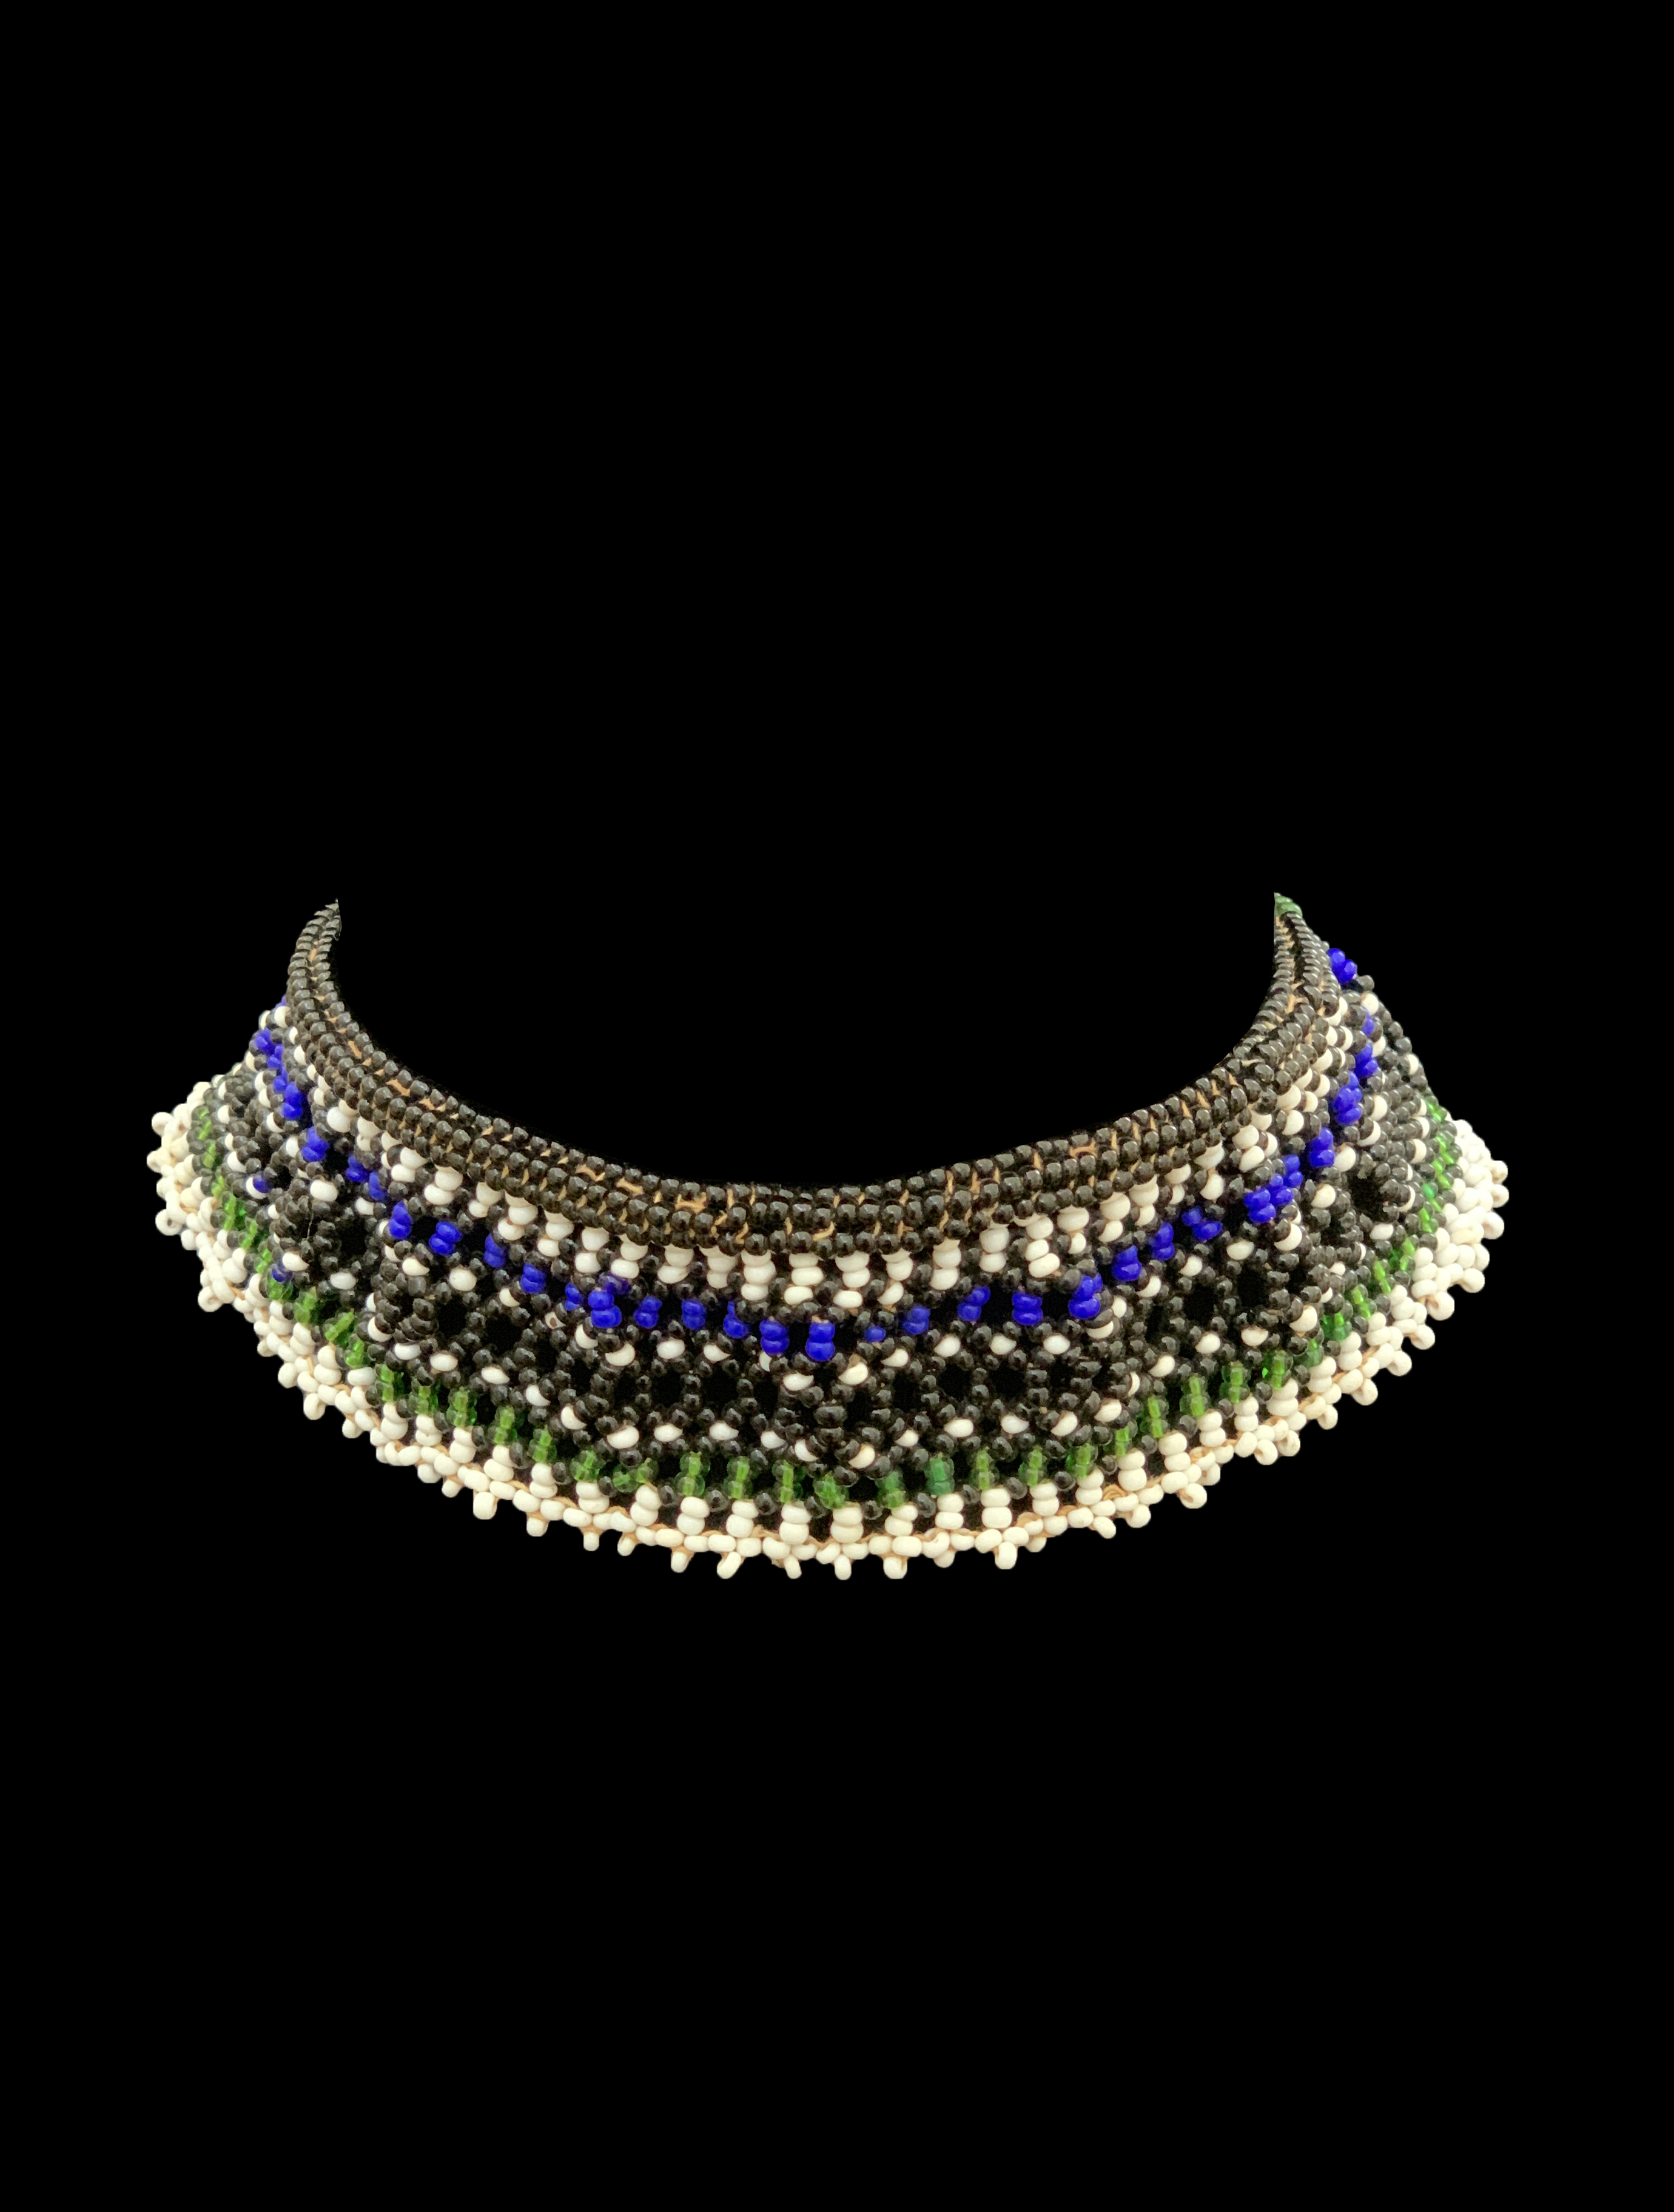 Child's Beaded Choker - Ndebele People, South Africa